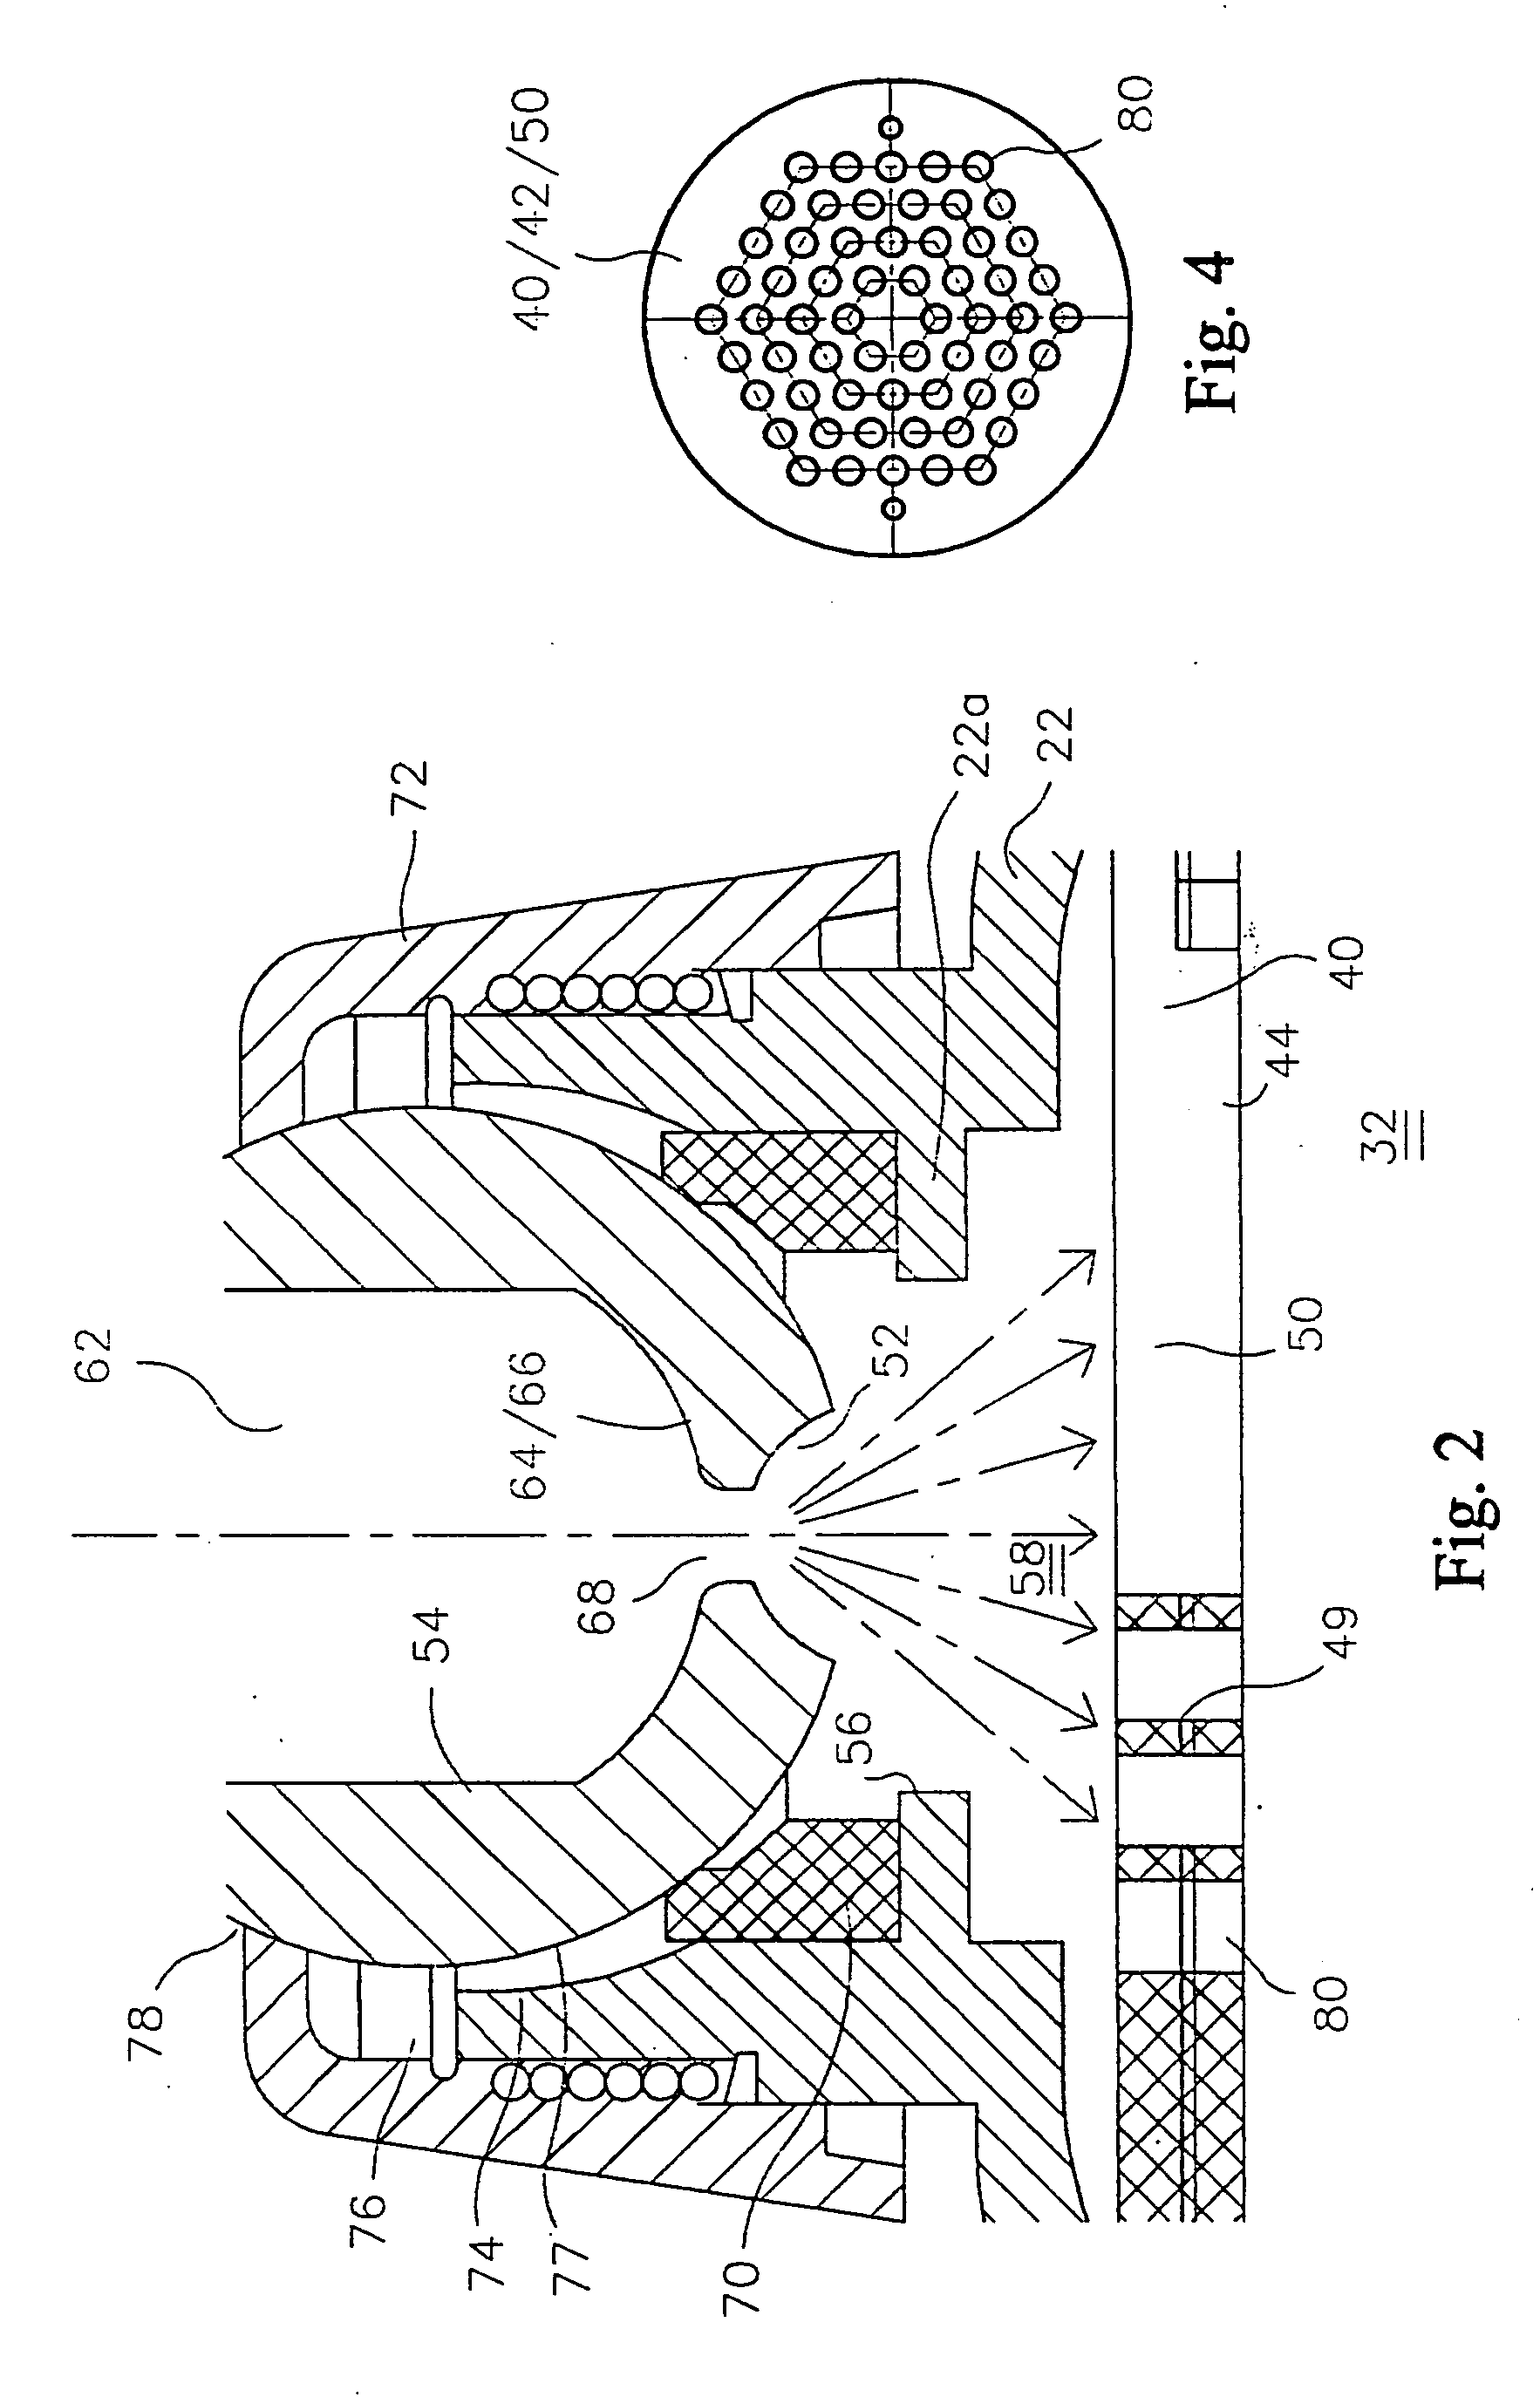 Multi-function showerhead filter system with swivel inlet connection